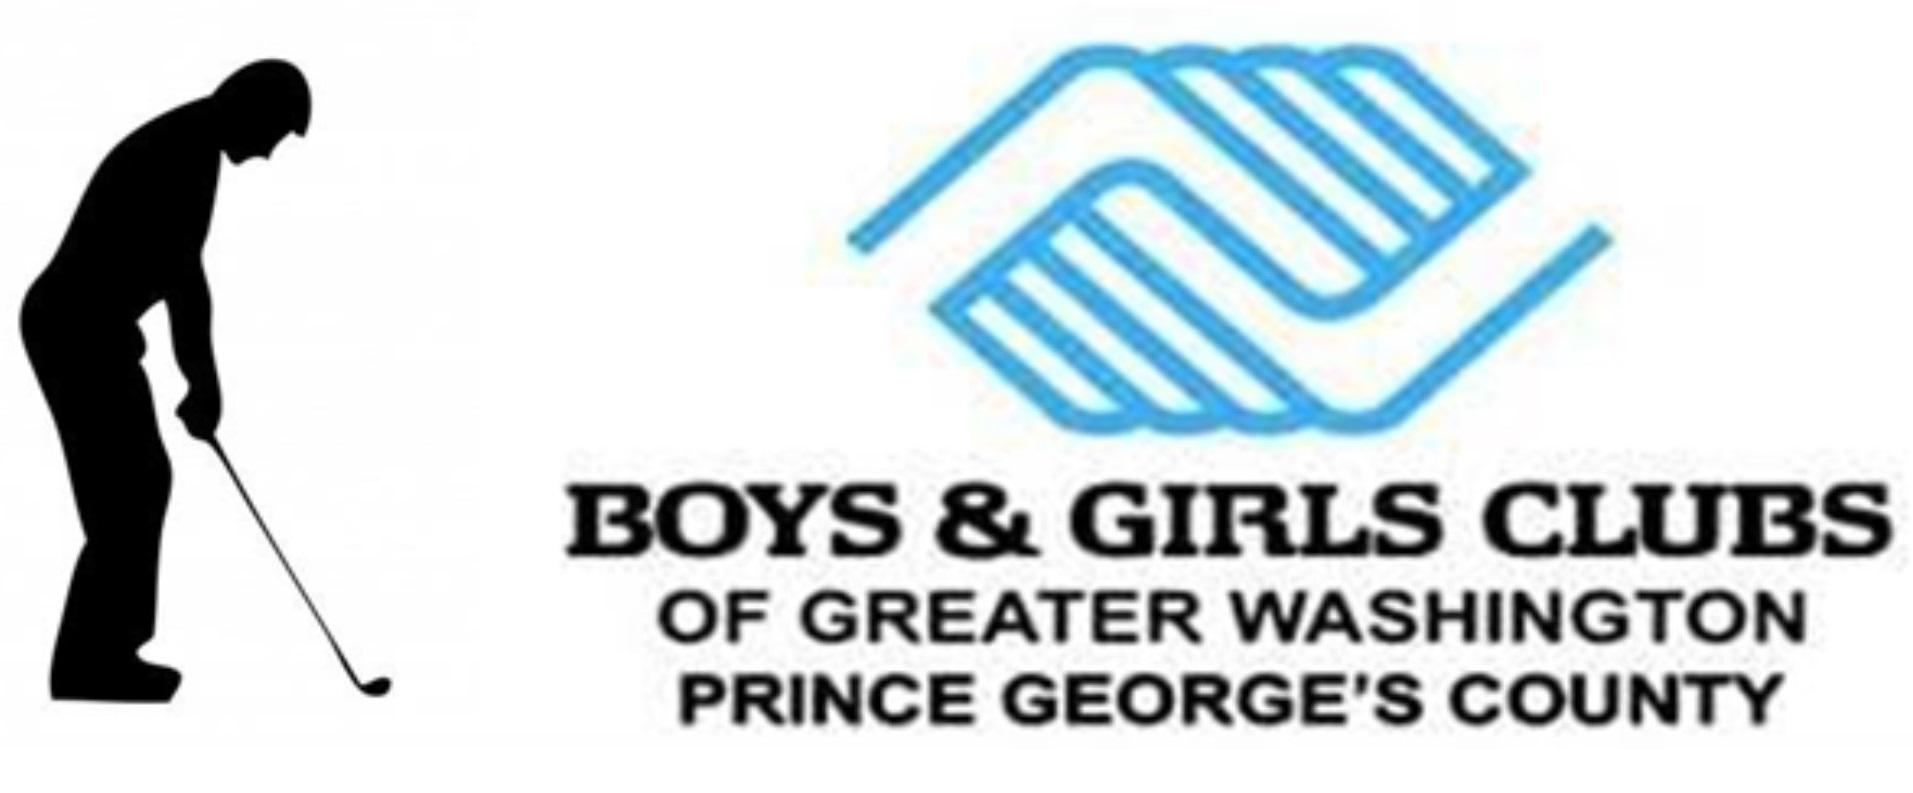 "Mentoring Matters" Golf Classic hosted by Prince George's County Boys & Girls Club